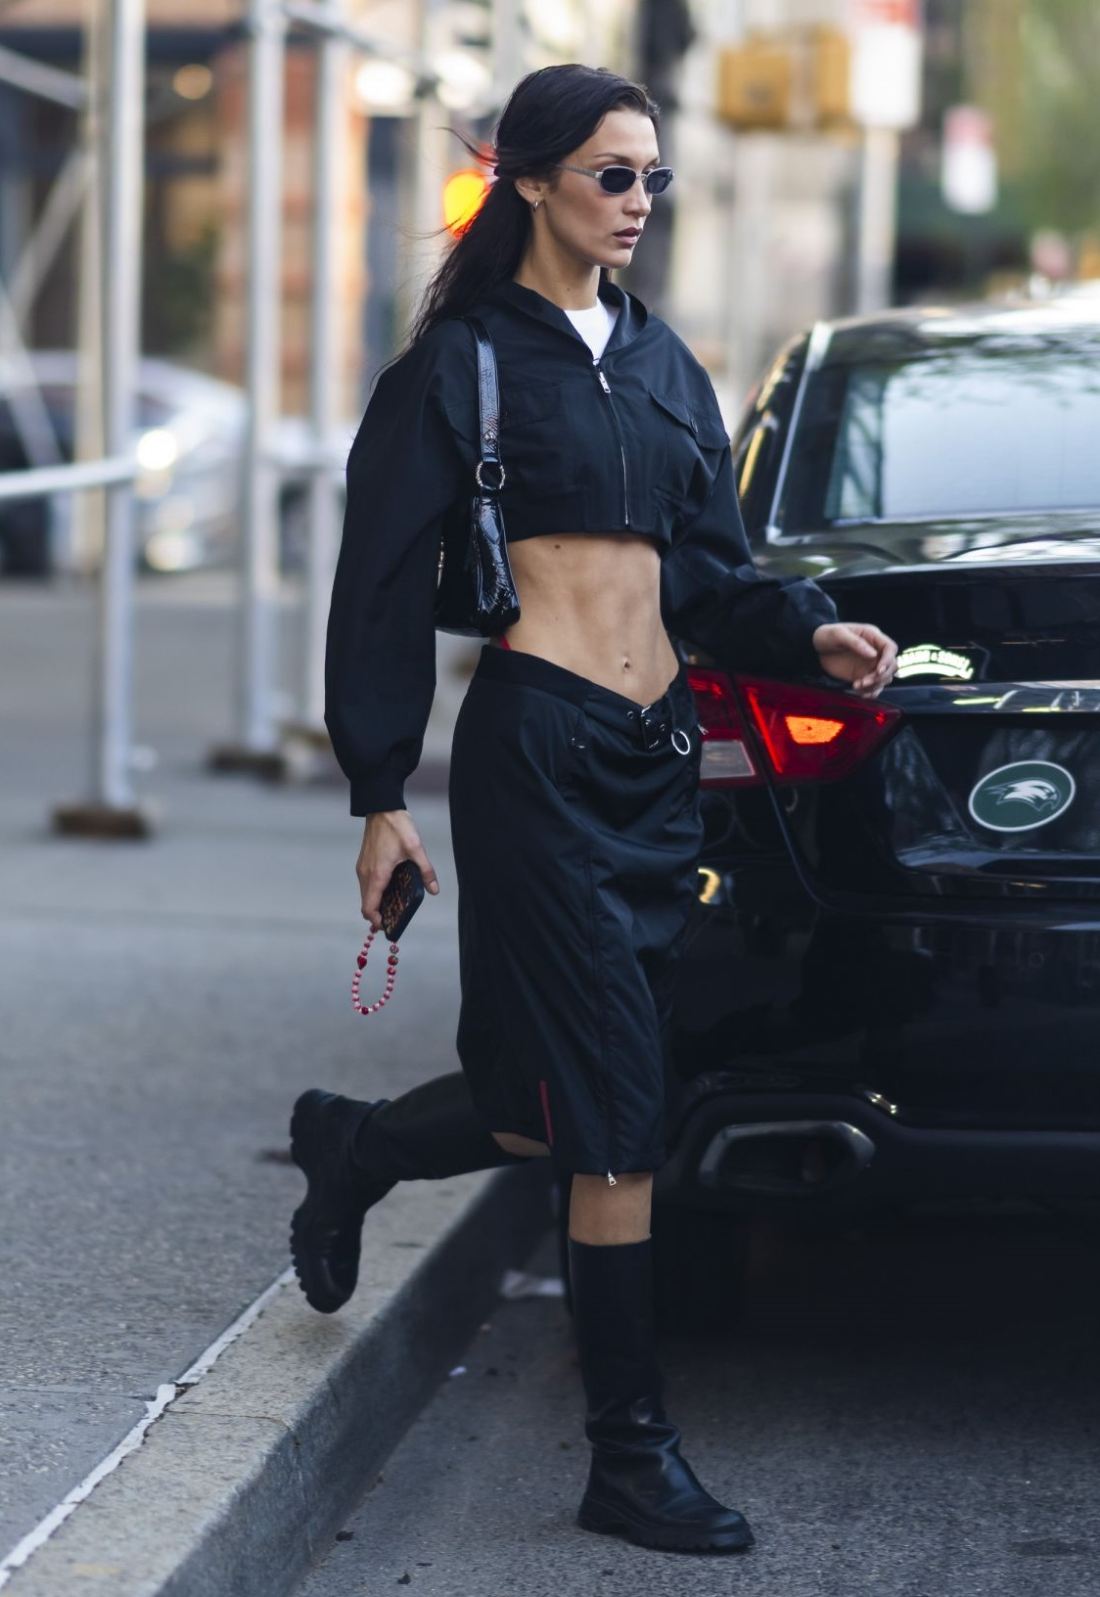 Bella Hadid in New York wearing Black Cropped Jacket, Nylon Cargo Skirt, 90s Style Black Shoulder Bag, and Vintage Prada Tall Boots Outfit